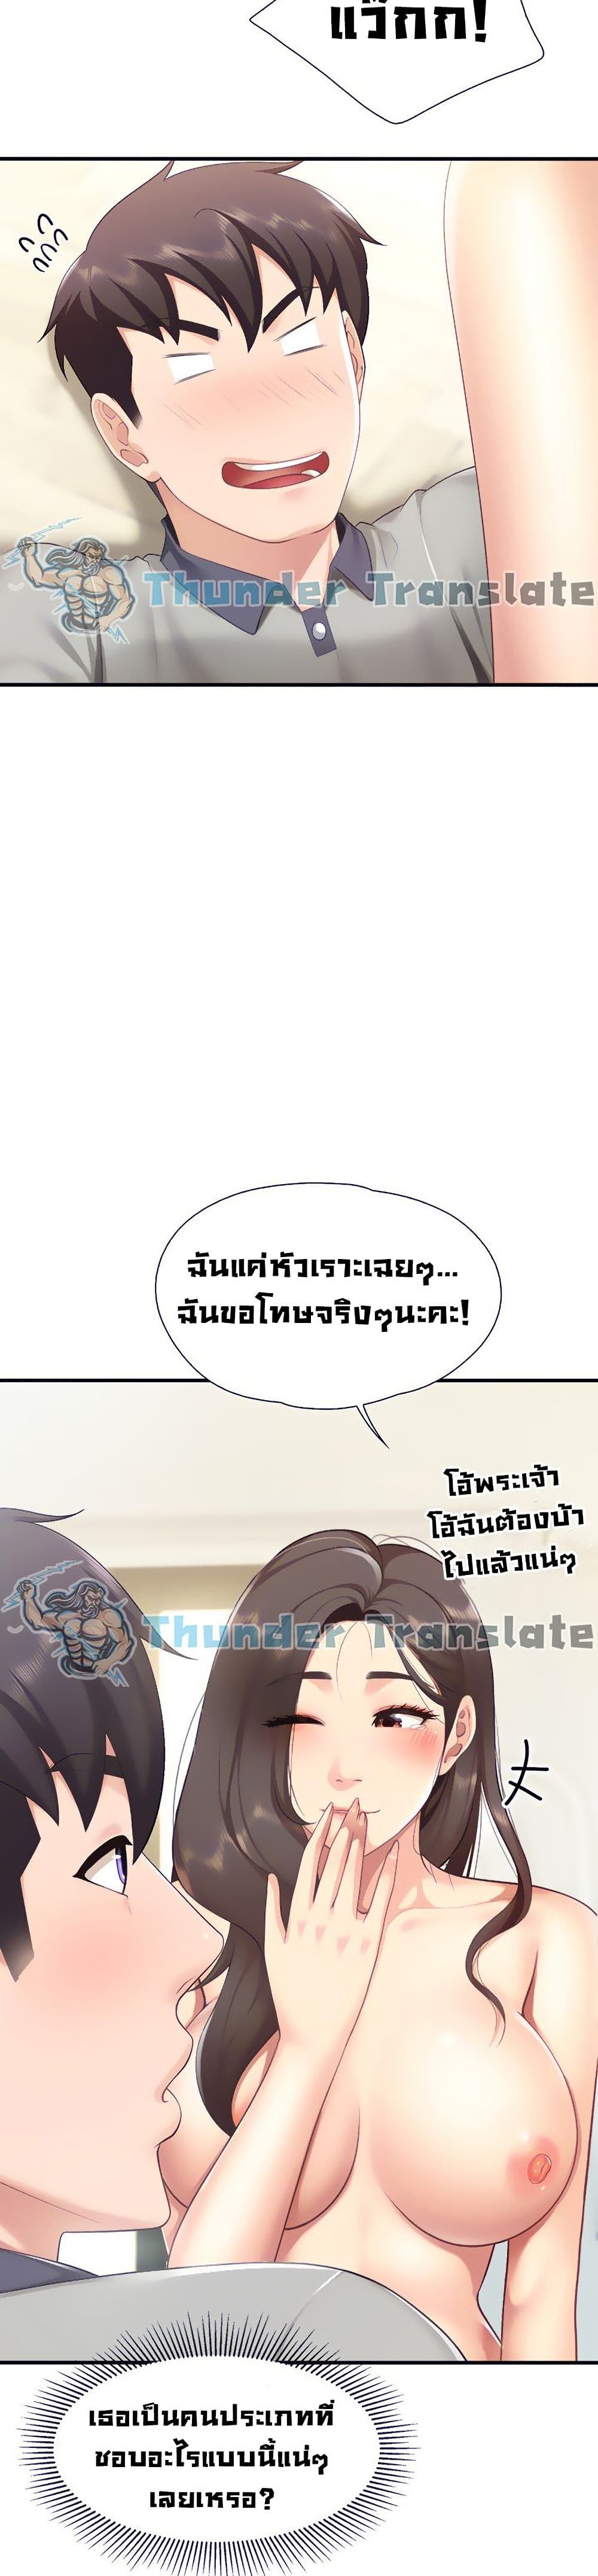 Welcome To Kids Cafe’ 15 ภาพ 21